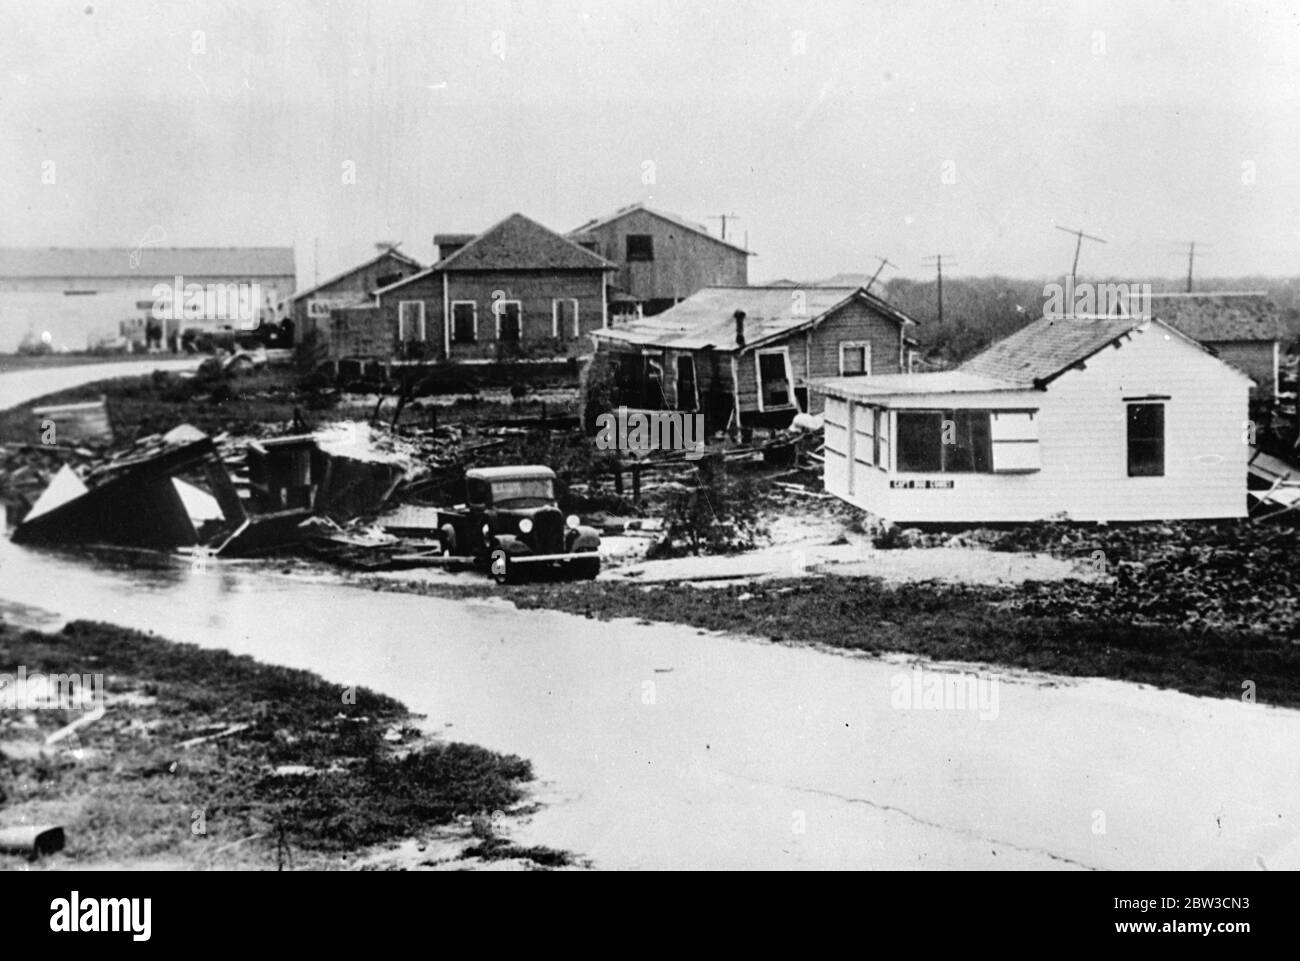 Hurricane ravages Florida . Hundreds dead . Ruin and desolation in the Florida town of Tavernier after the hurricane . 14 September 1935 Stock Photo